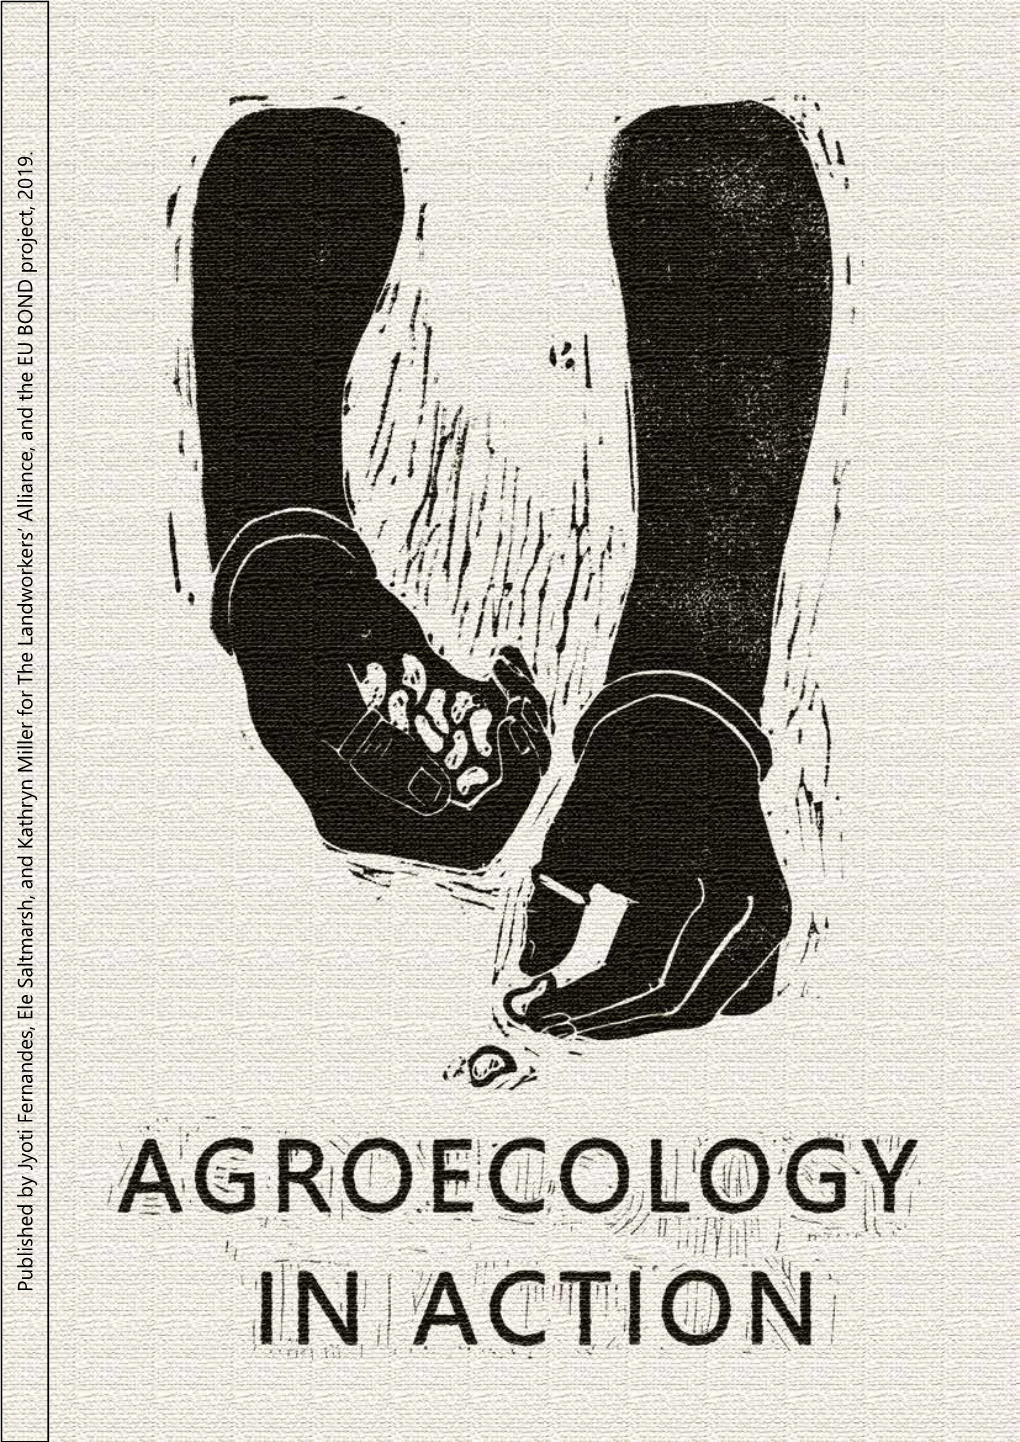 Agroecology in Action” Highlights What Pioneers of Agroecology Right Here in the UK Are Doing to Create a Productive and Sustainable Agriculture